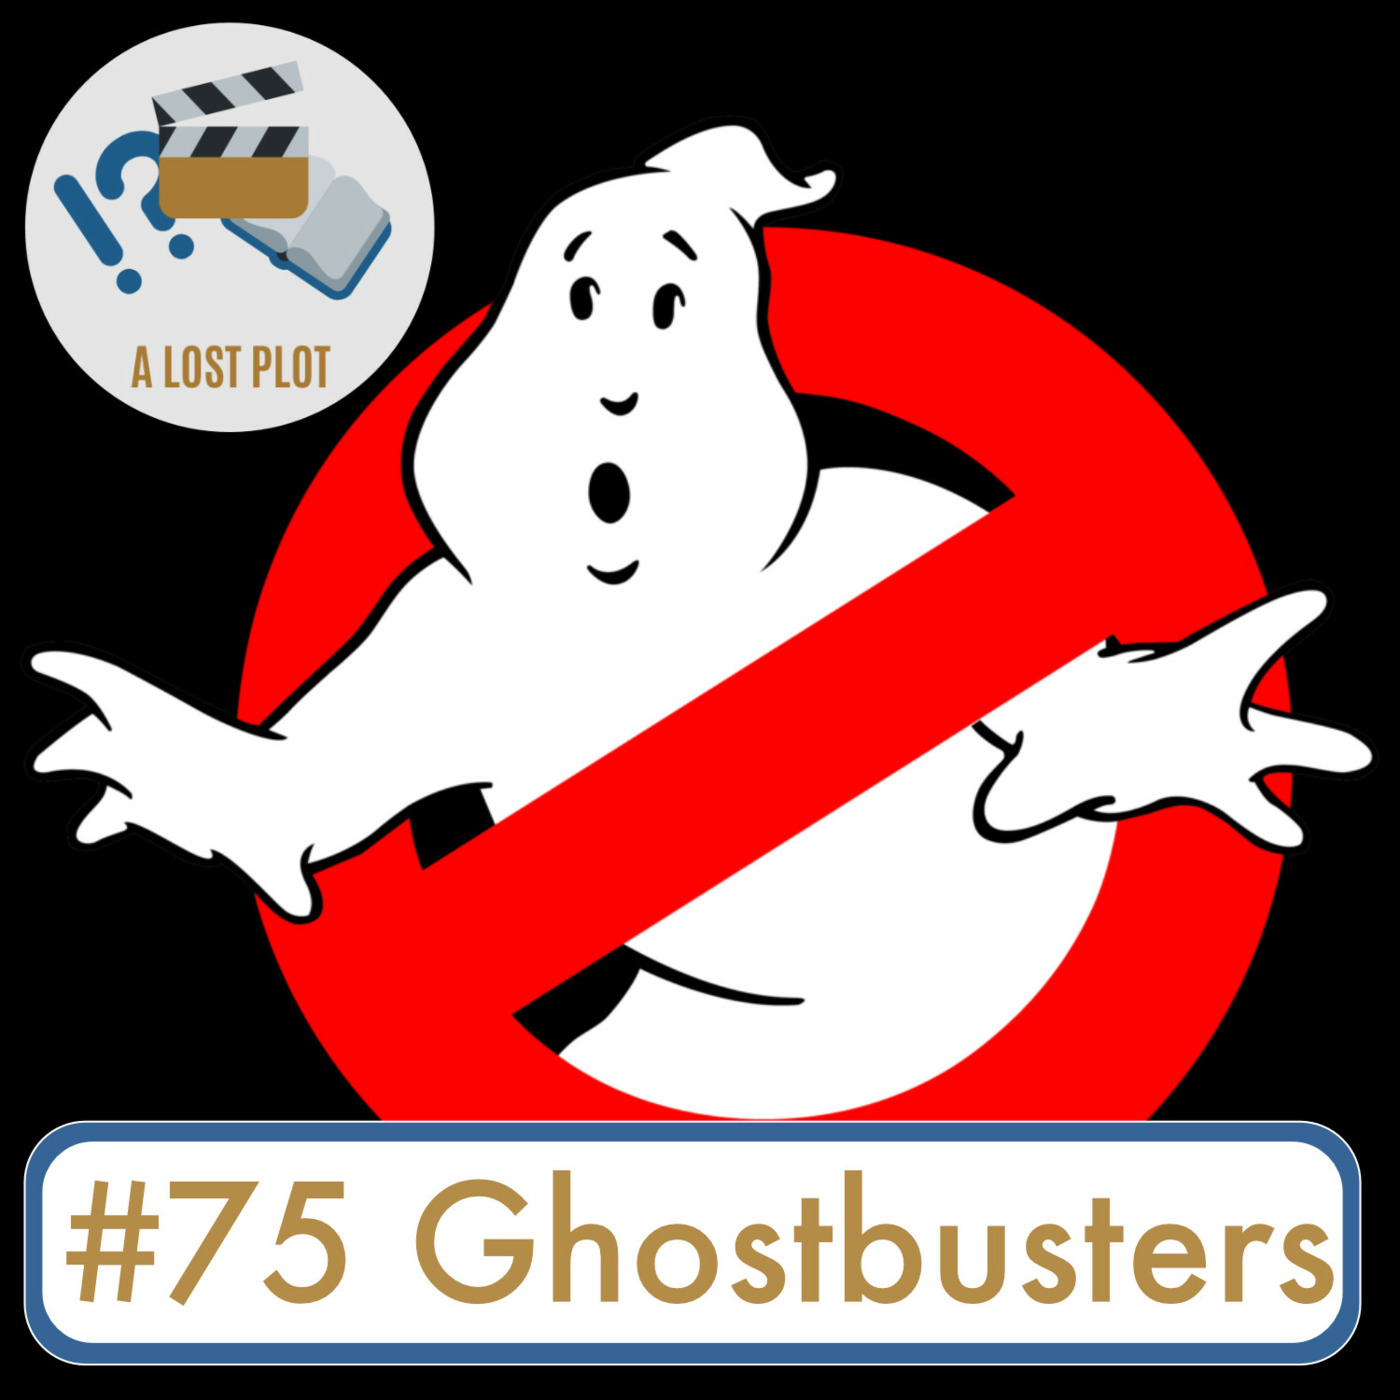 Episode 75: Ghostbusters: Do Comedies Break the Rating System?